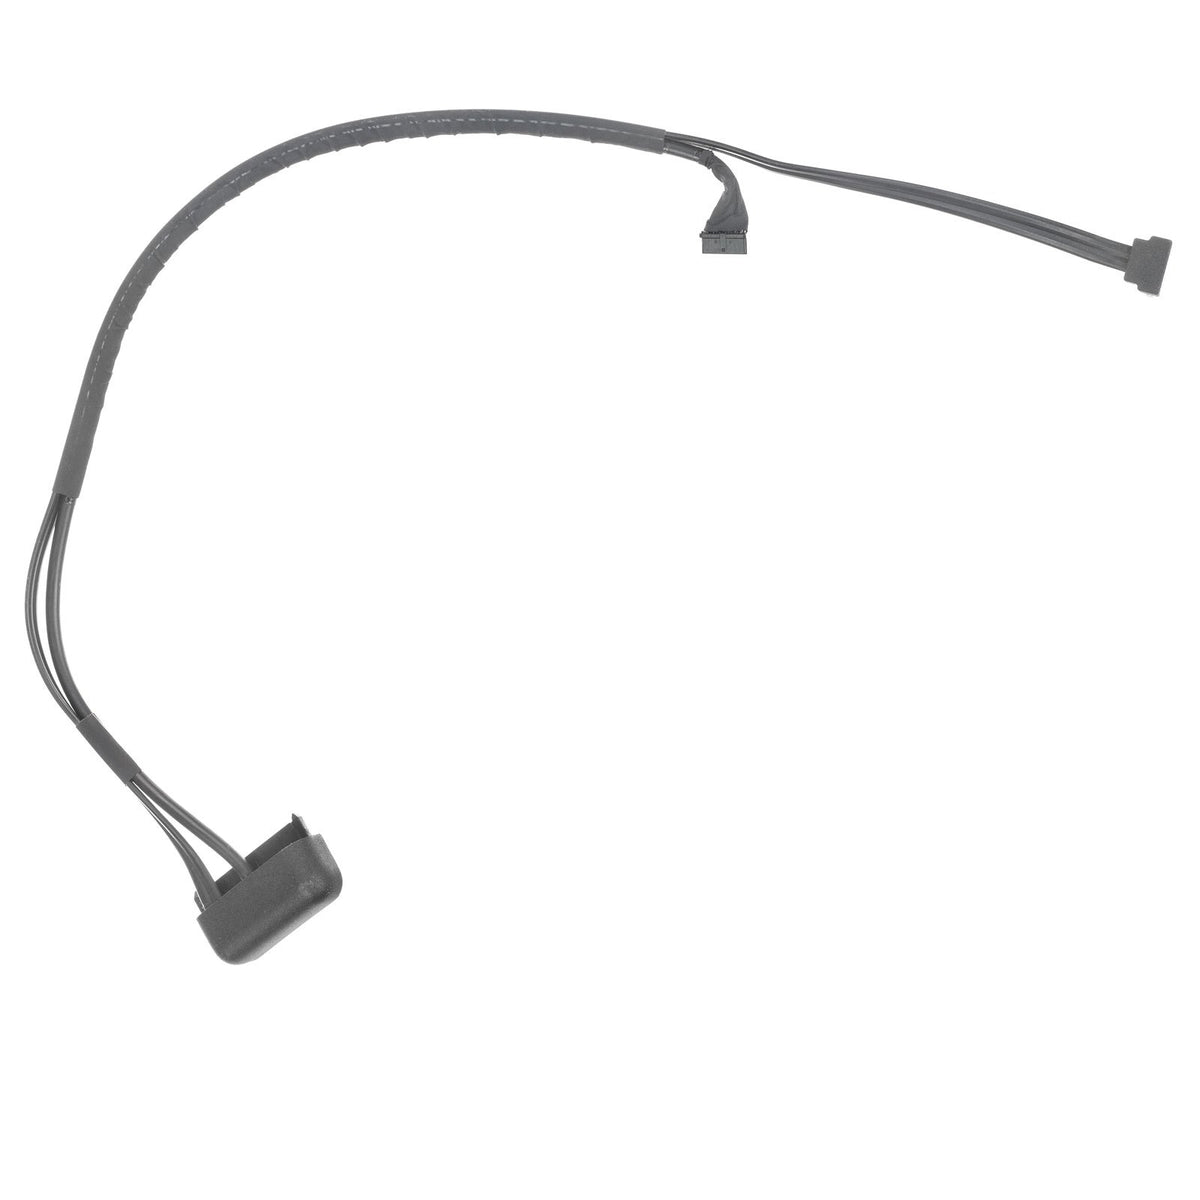 HARD DRIVE CABLE (HDC) FOR IMAC 27" A1419 (LATE 2013)